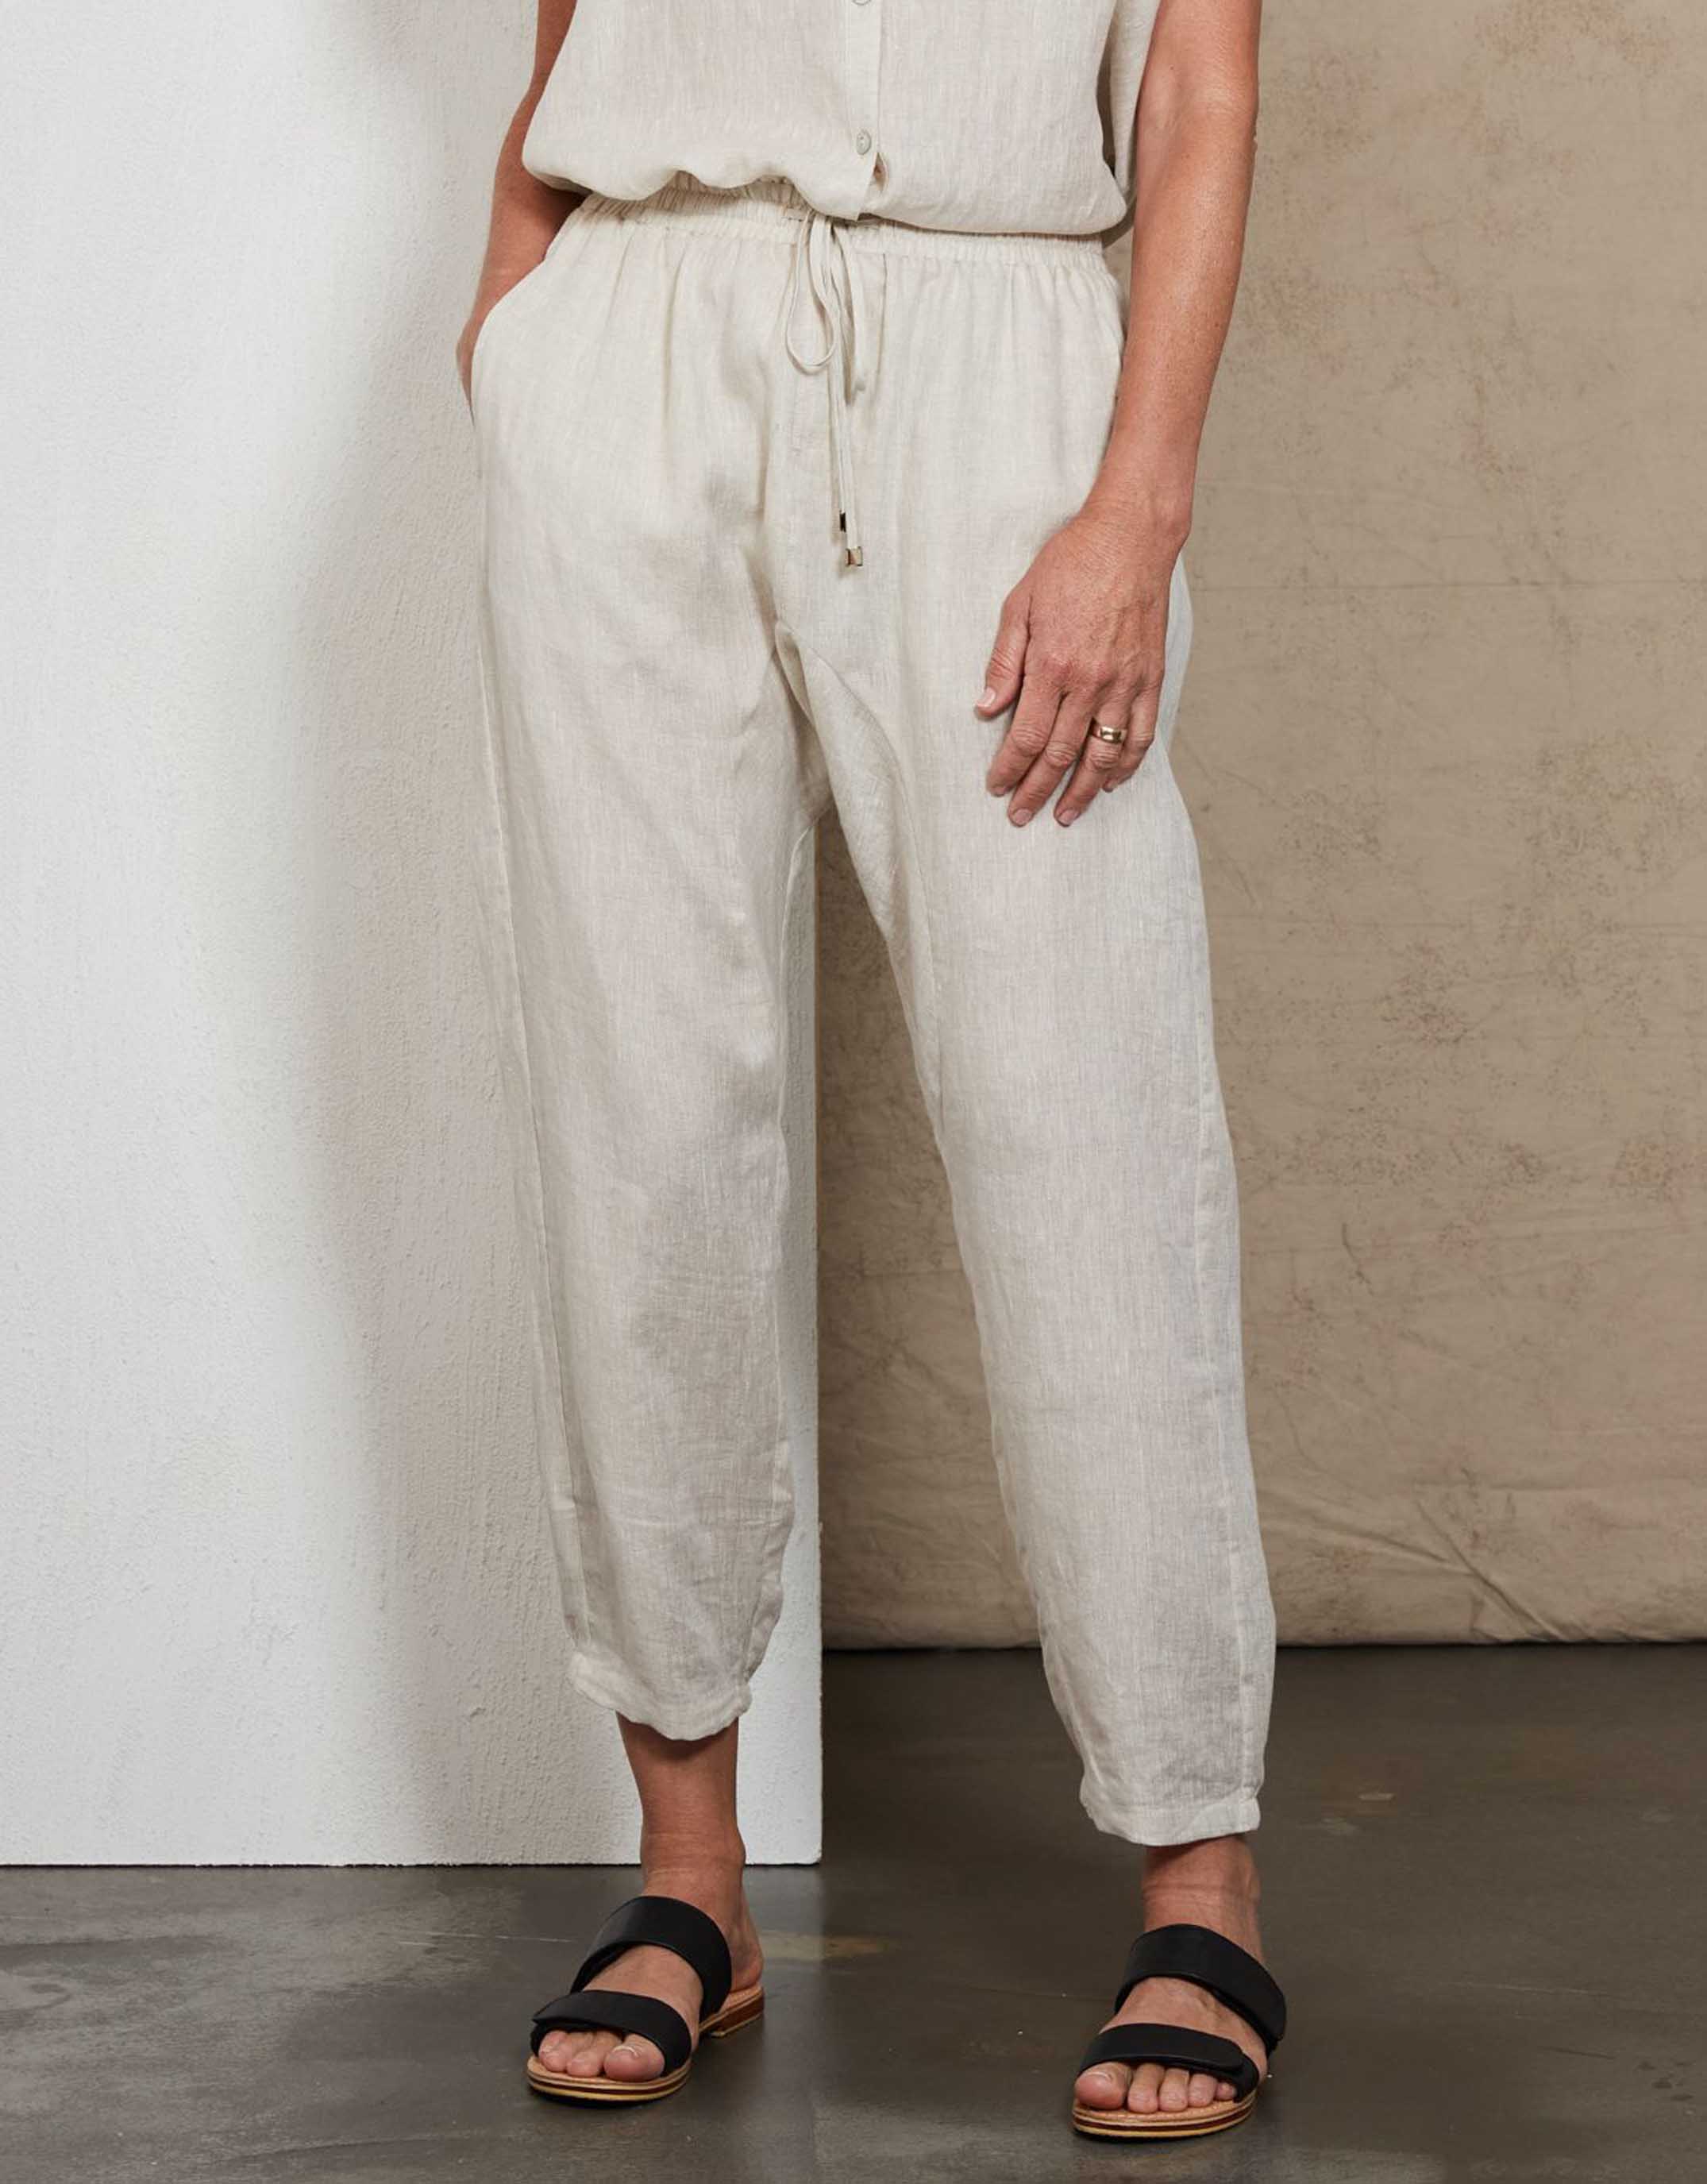 Eb&Ive | Studio Relaxed Pant - Tusk | Casual Pants